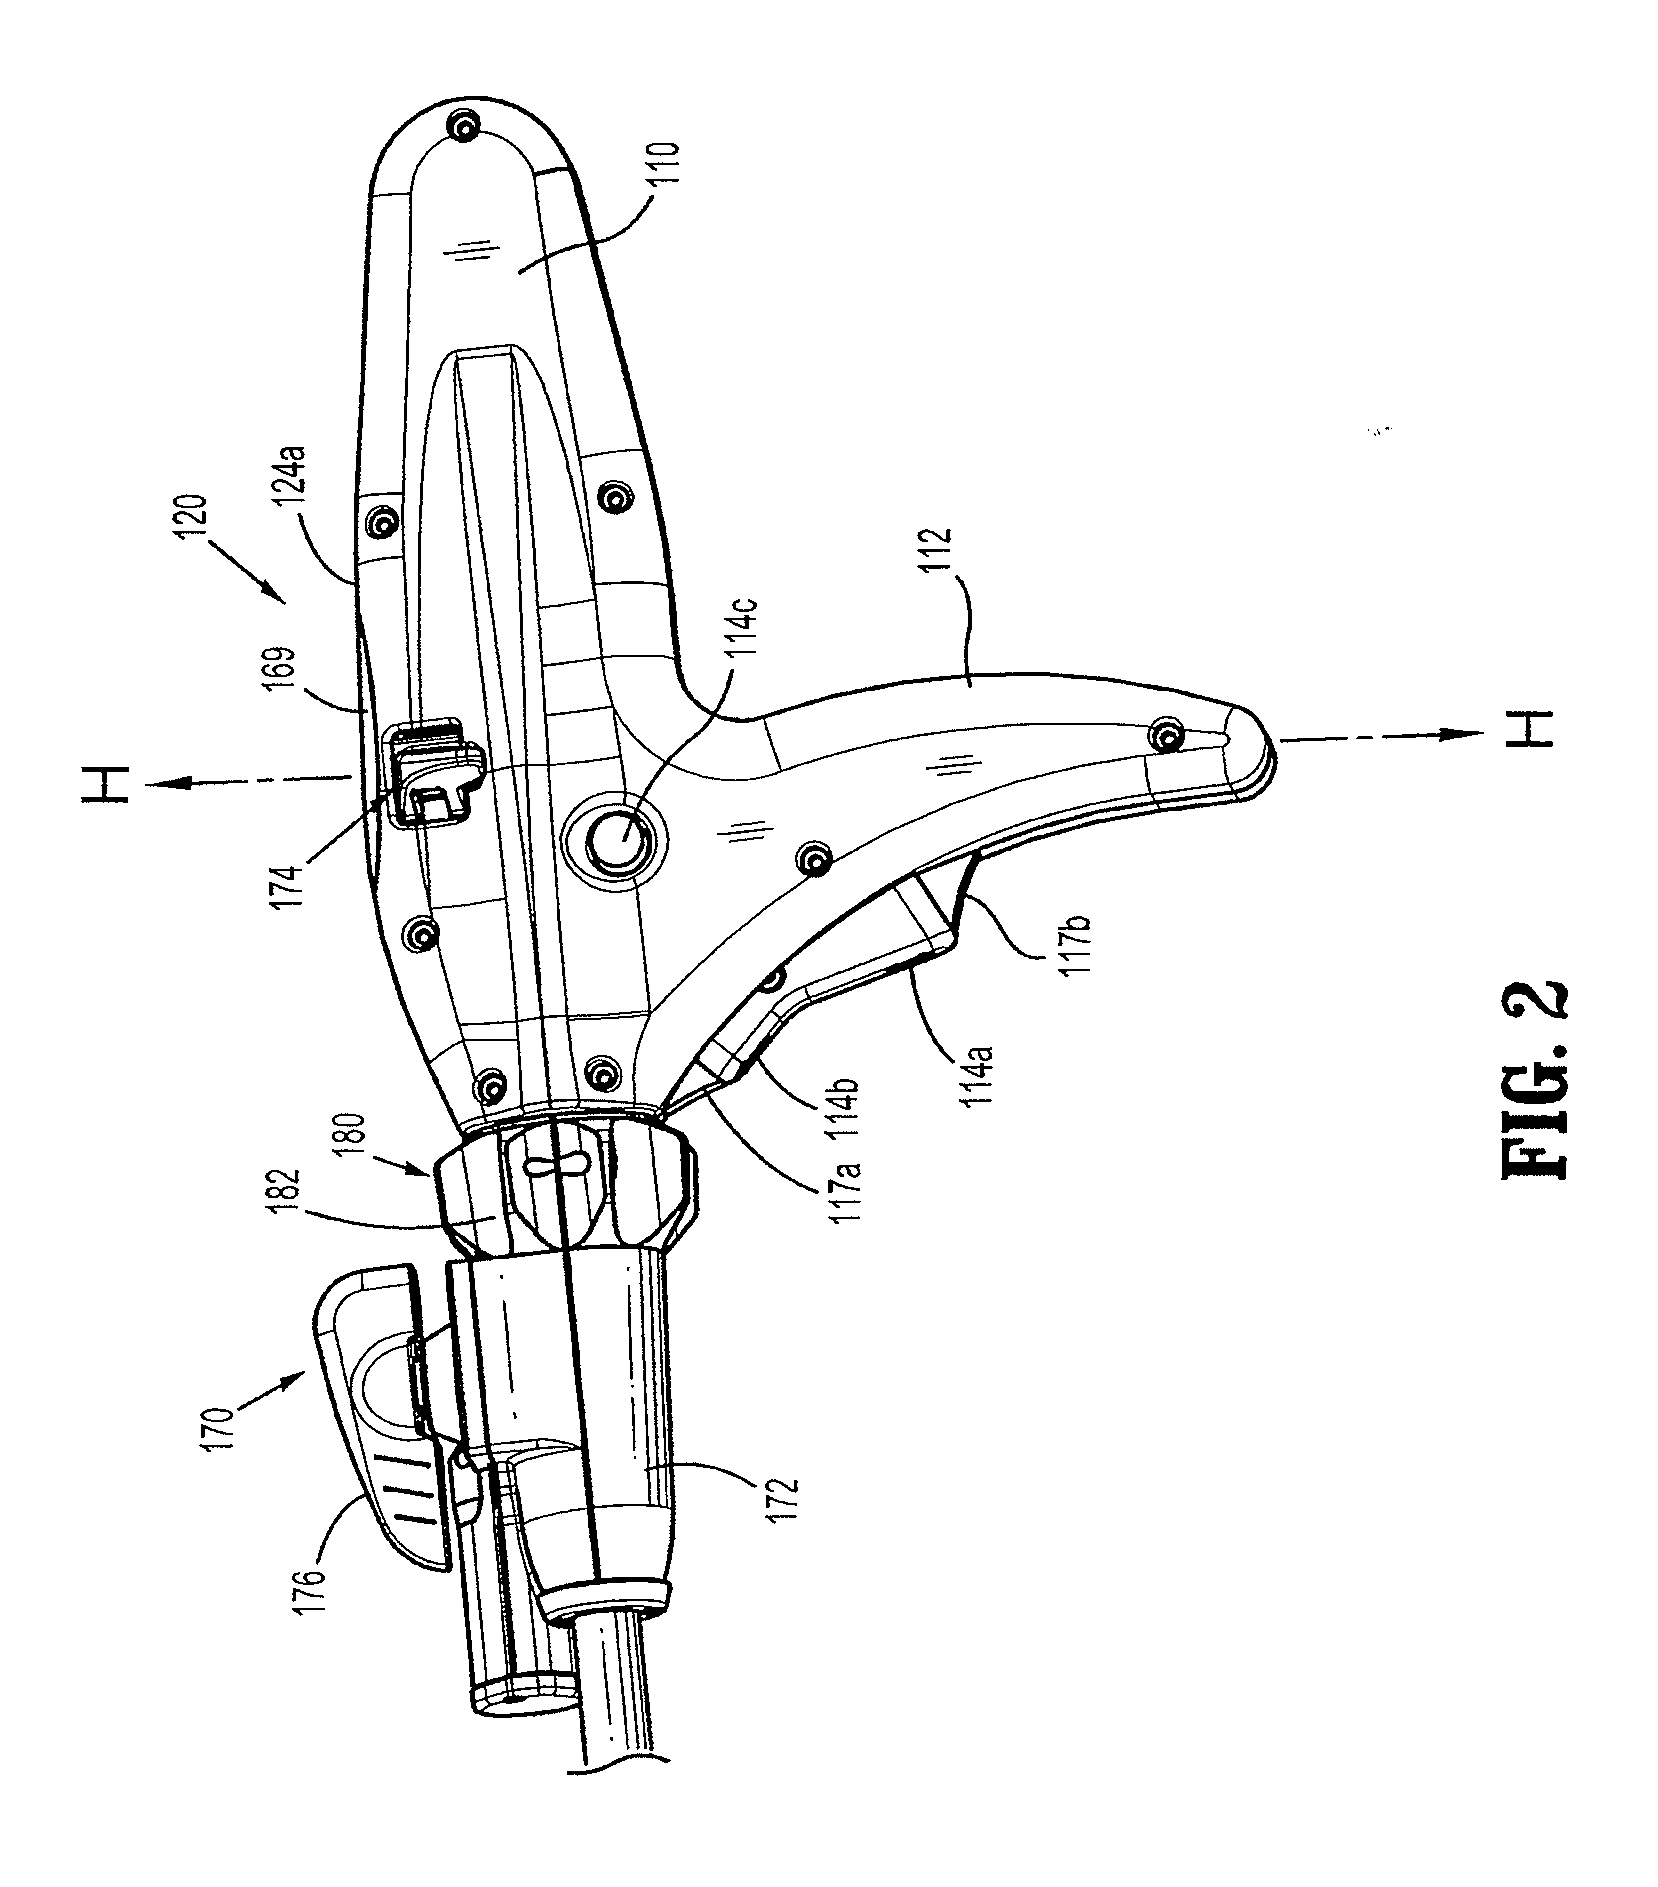 Battery ejection design for a surgical device